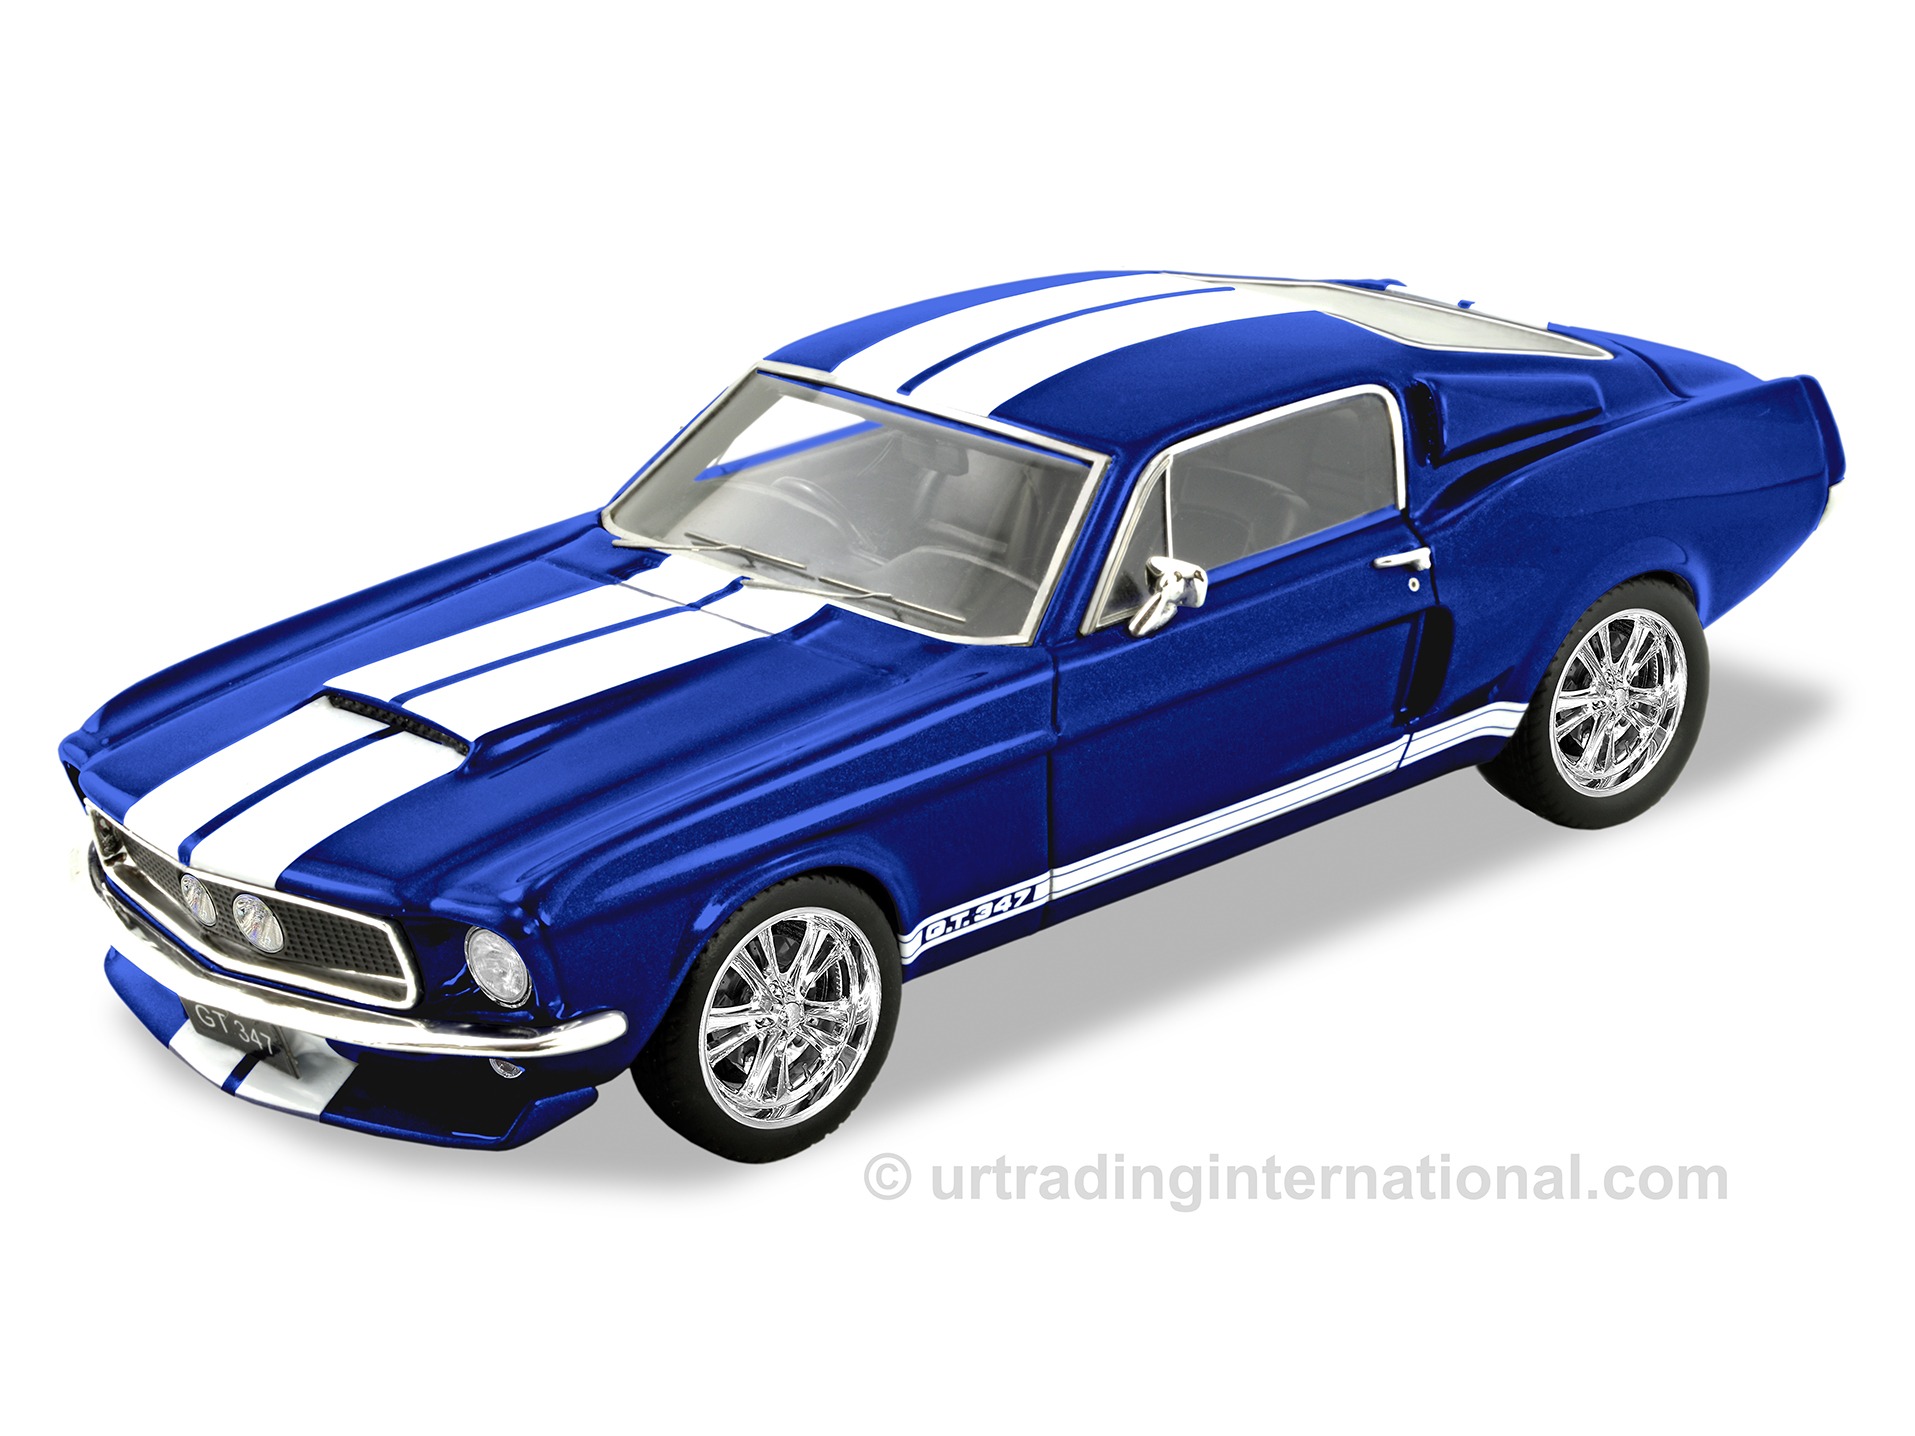 1967 Mustang Fastback Customised – Blue